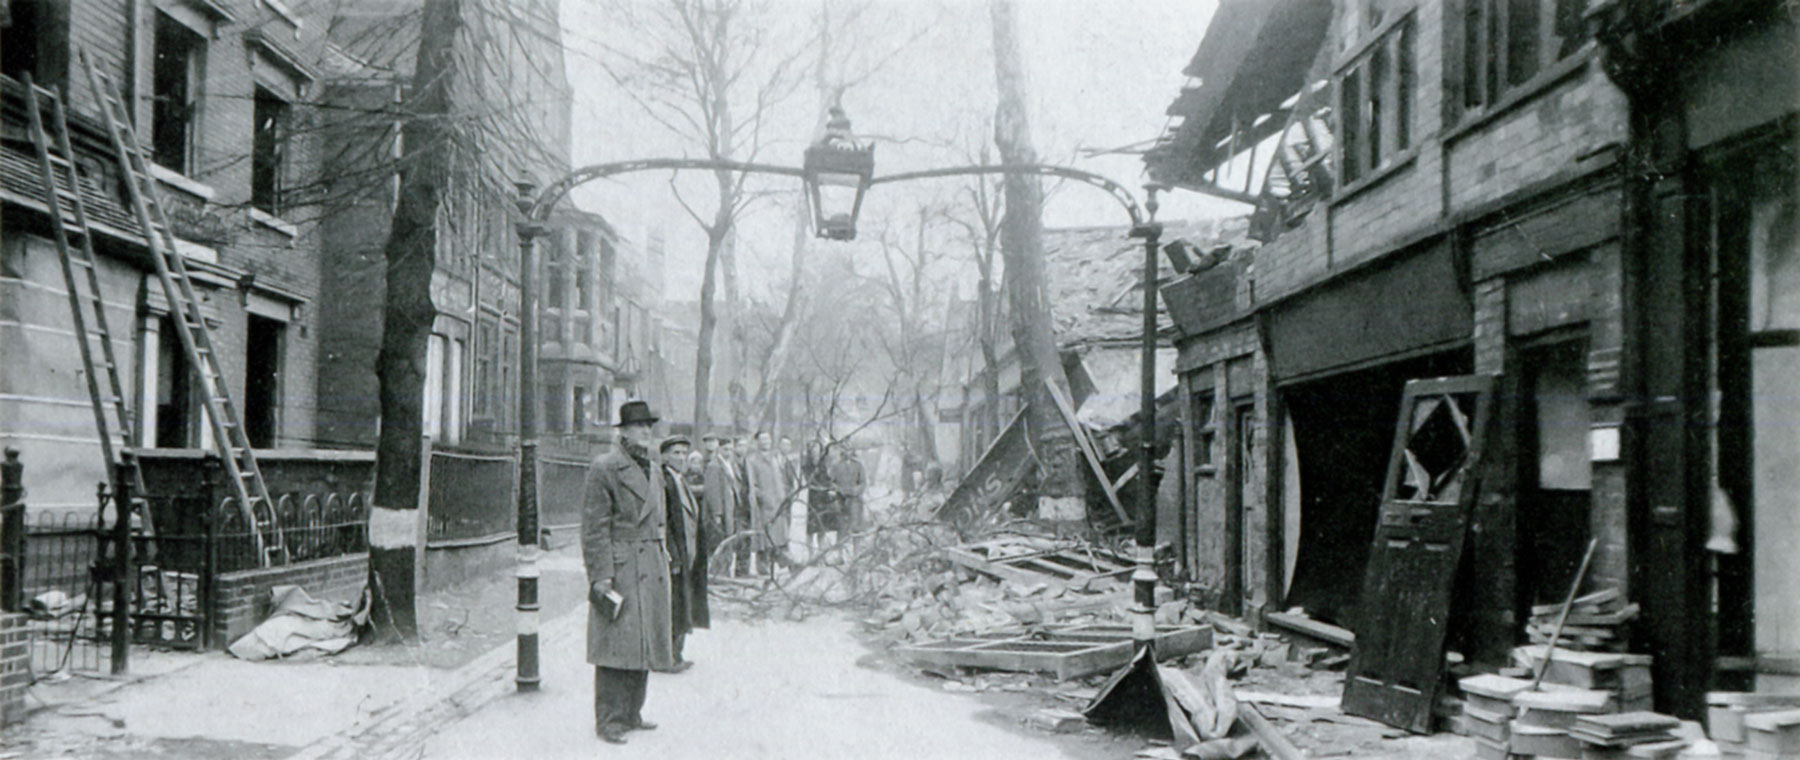 Photograph showing Second World War bomb damage in Lower New Walk